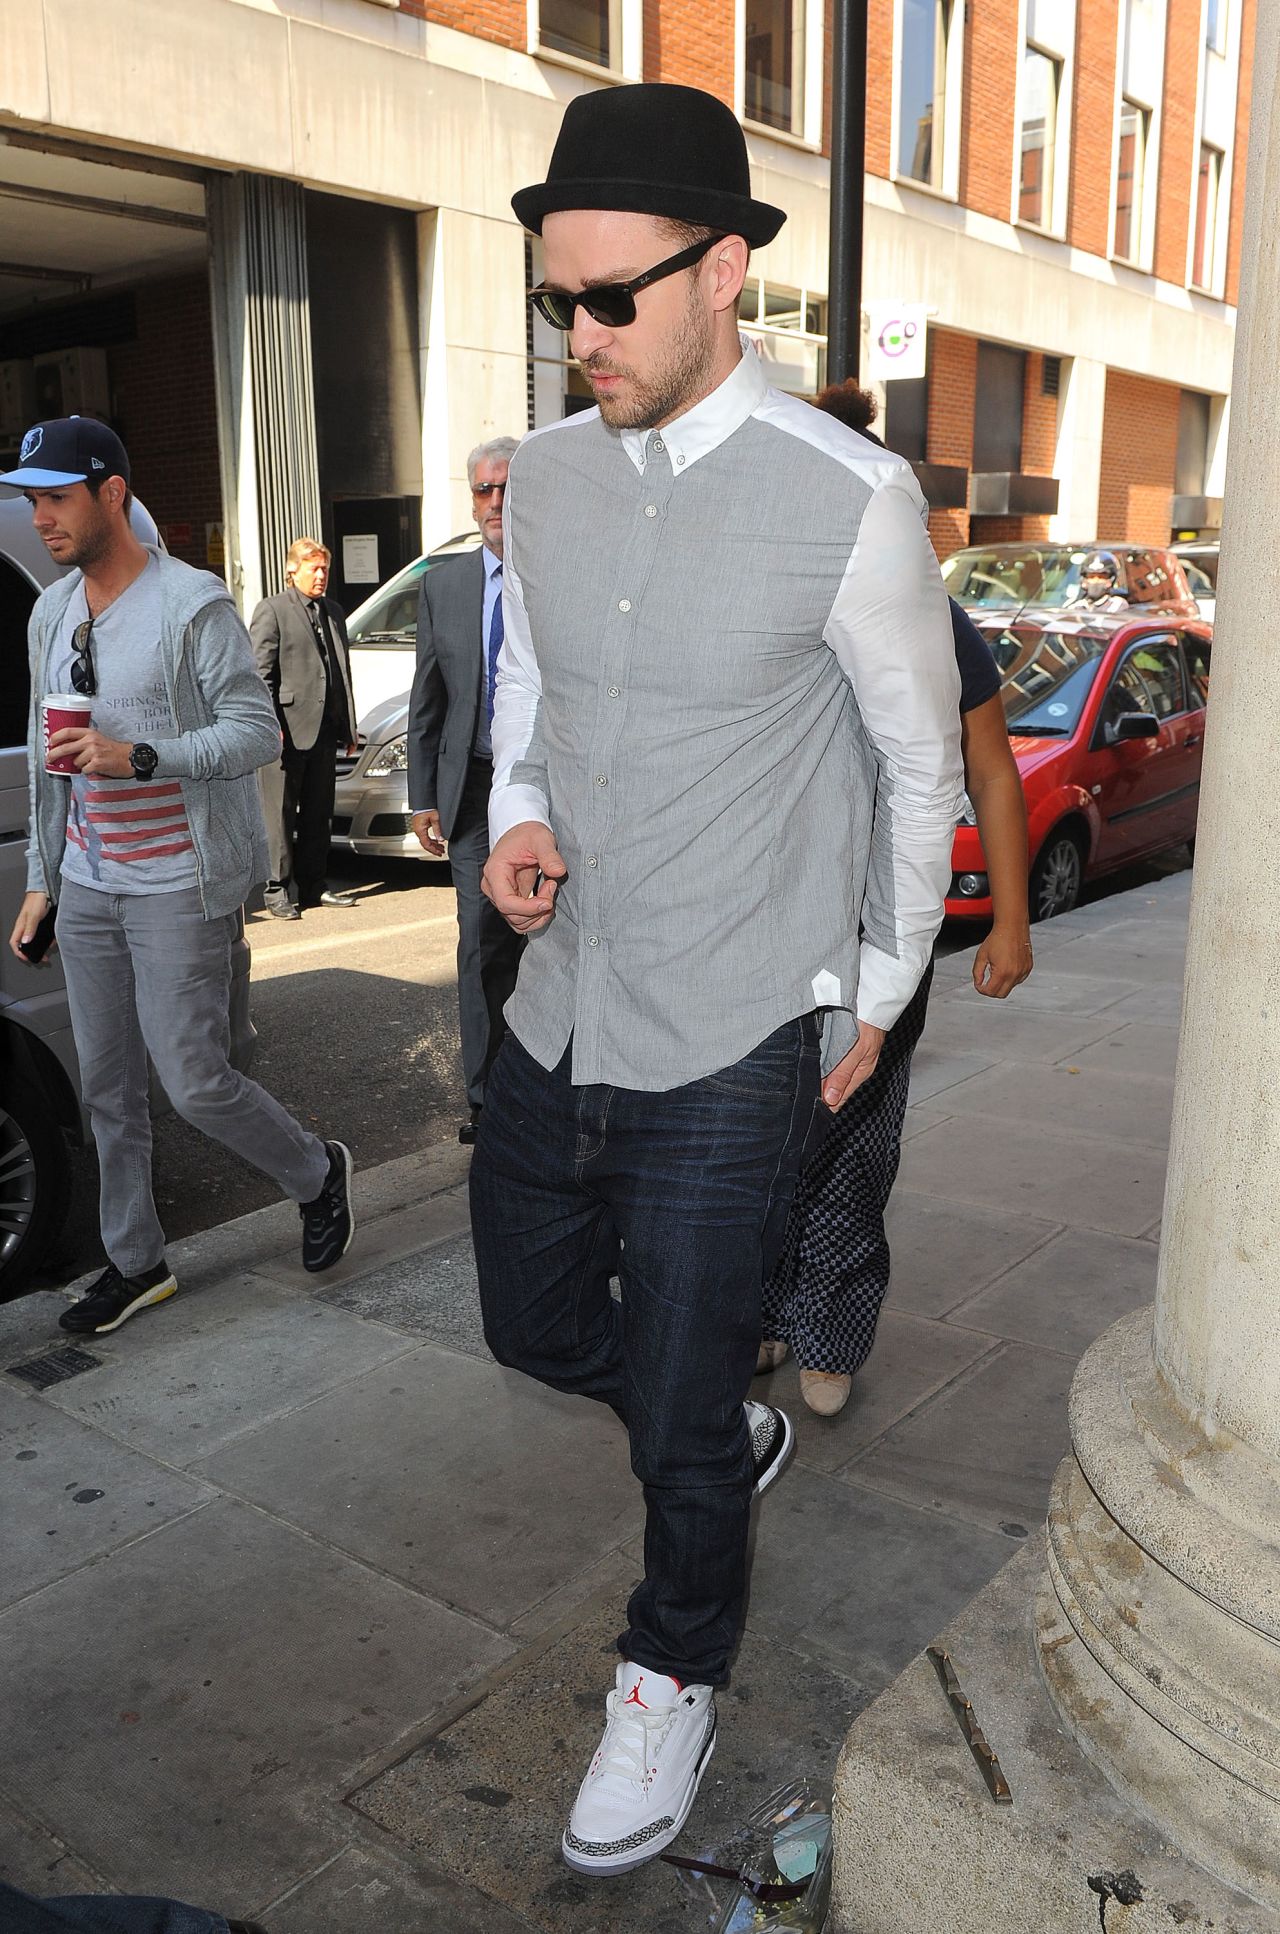 Justin Timberlake keeps a low profile as he heads to Kiss FM in London on September 4.